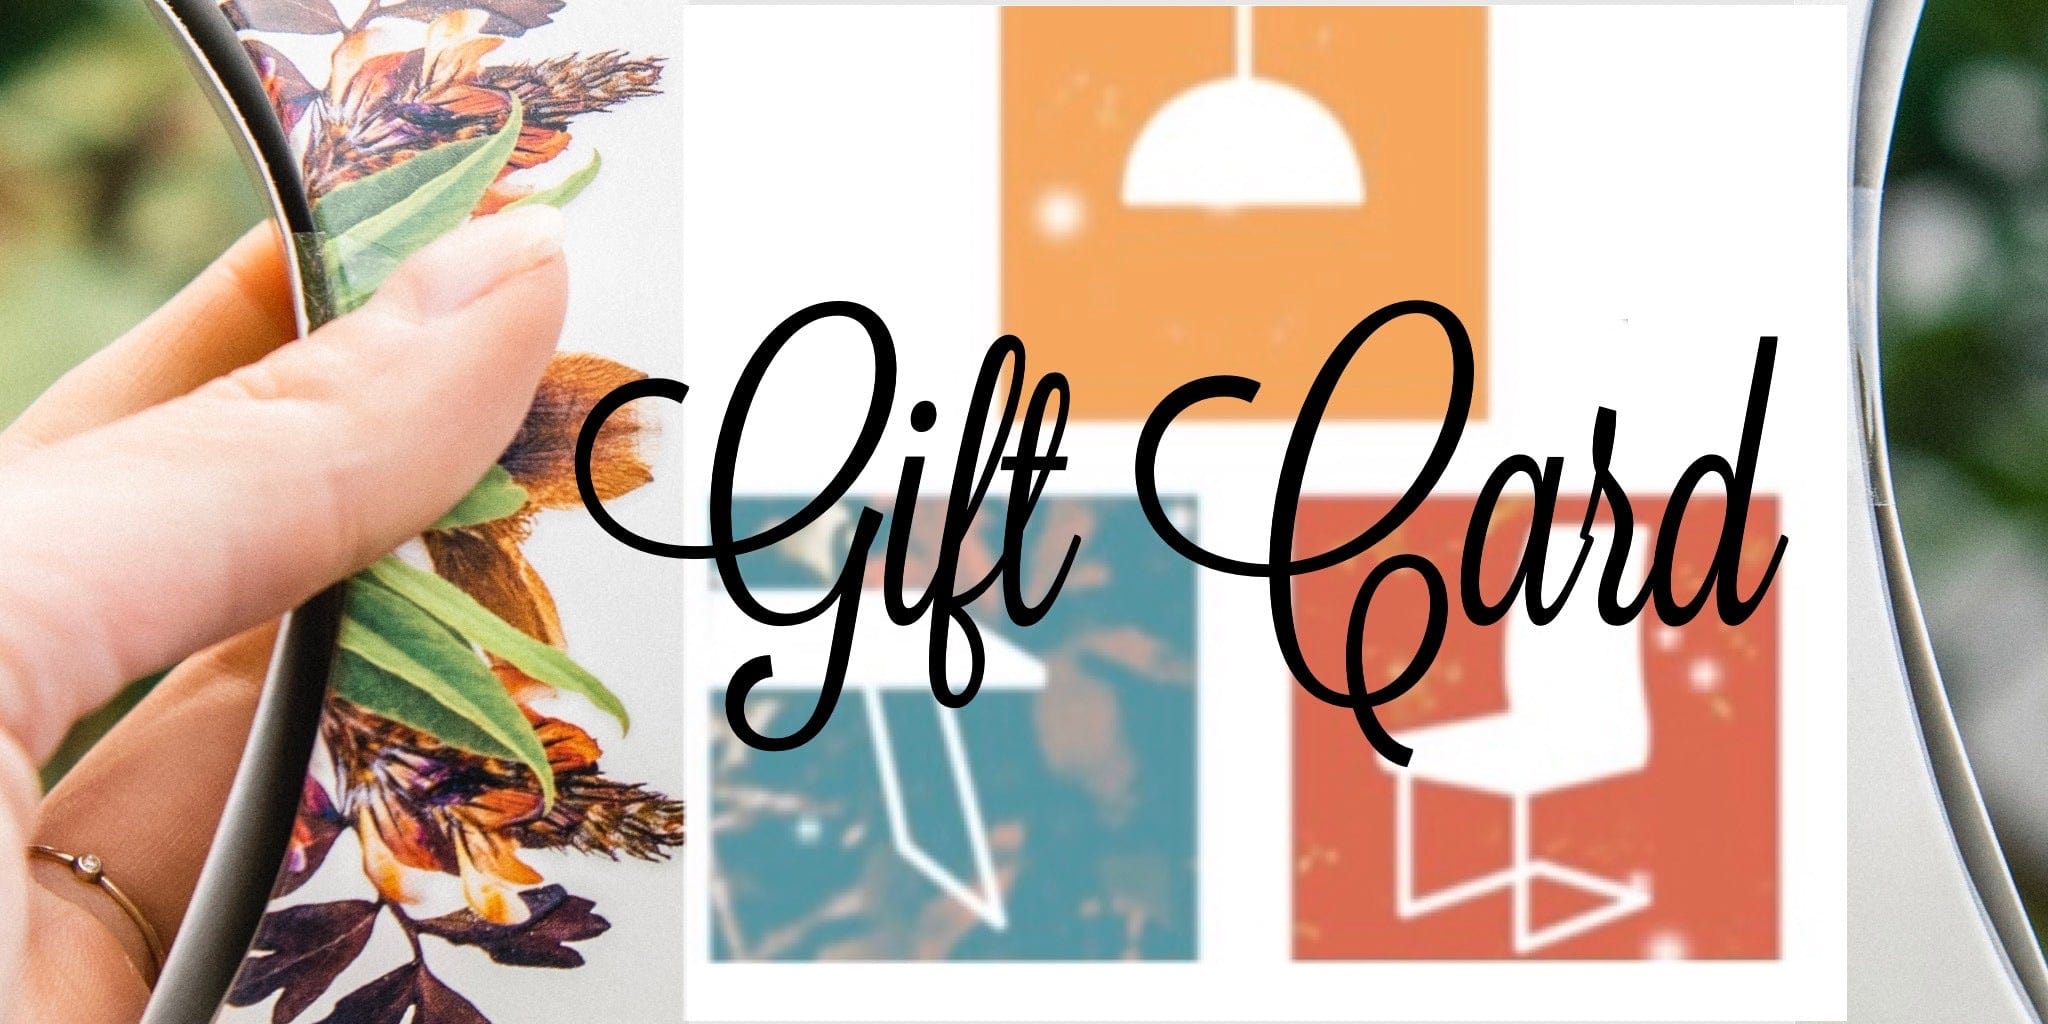 Spruced Roost Gift Card $75.00 USD Gift Cards